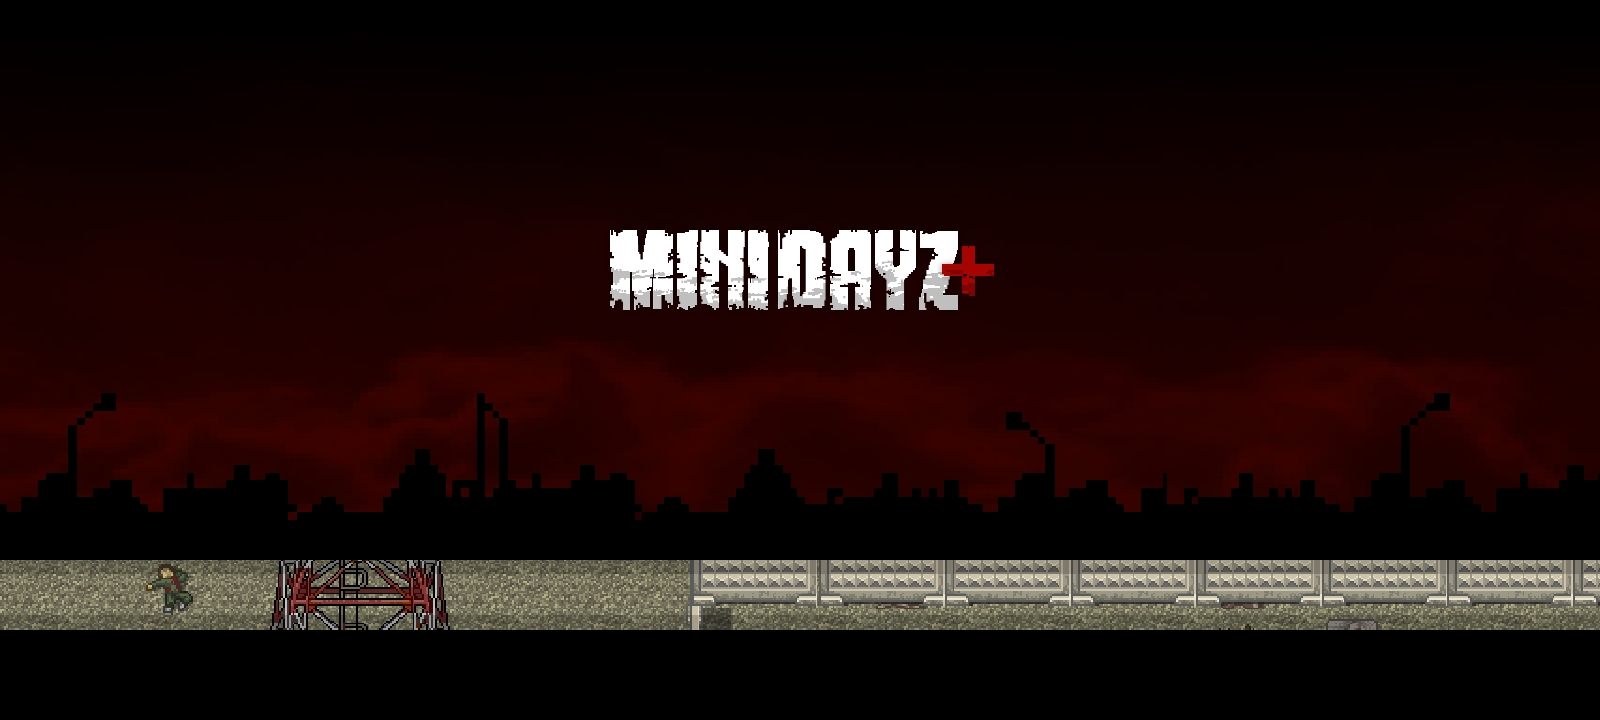 Hi everyone, does anyone have a link to download the Mini dayZ x Fallout  mod? : r/MiniDayZ